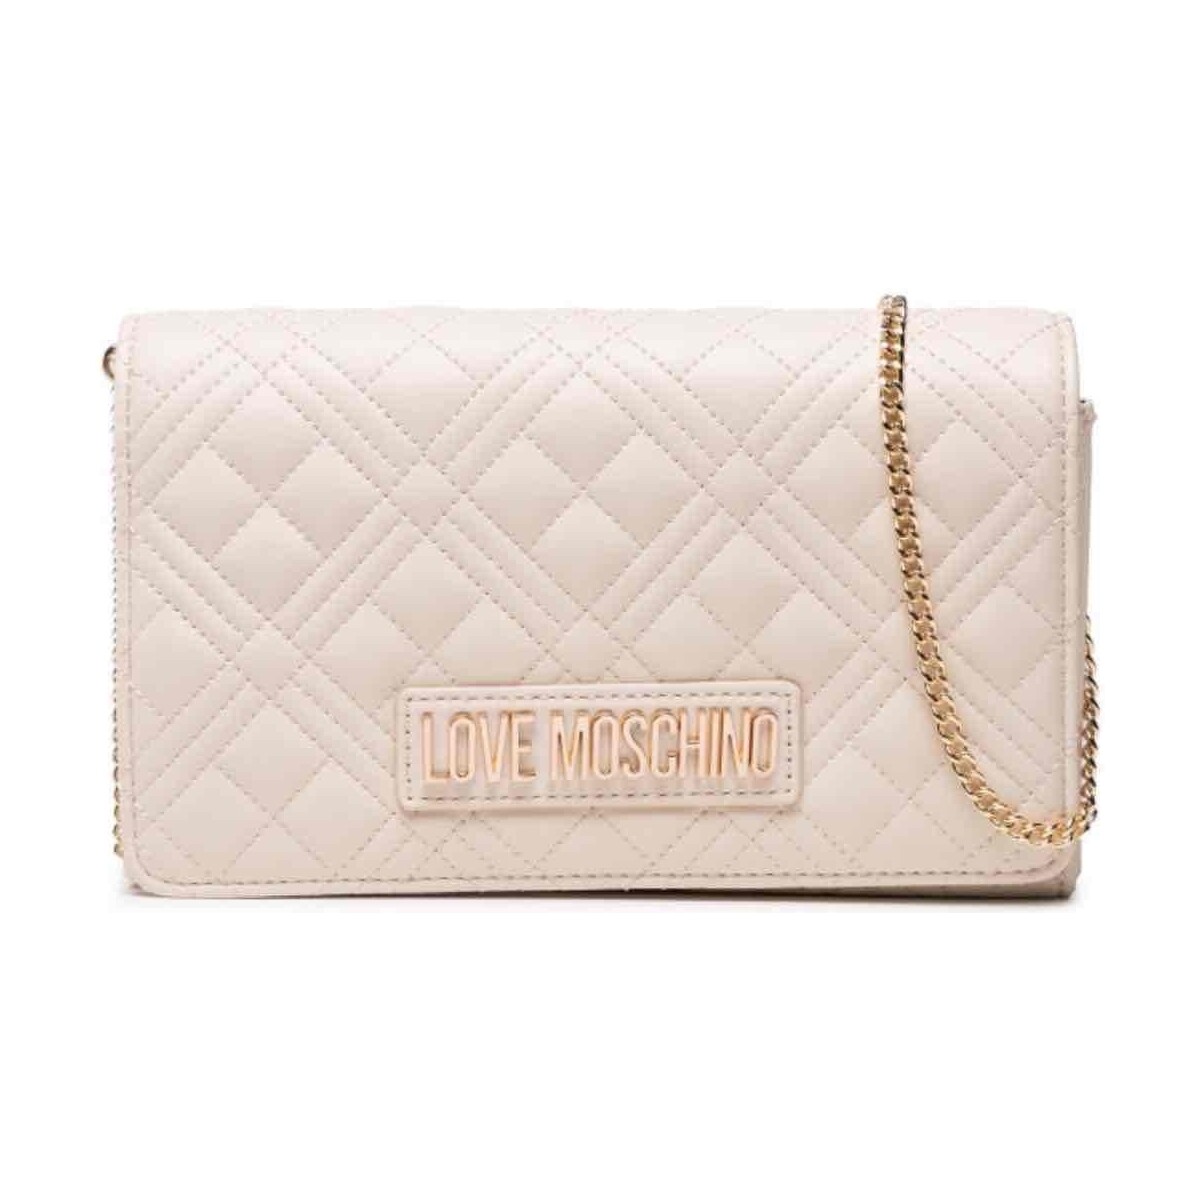 Love Moschino Autres WWiWYwtS